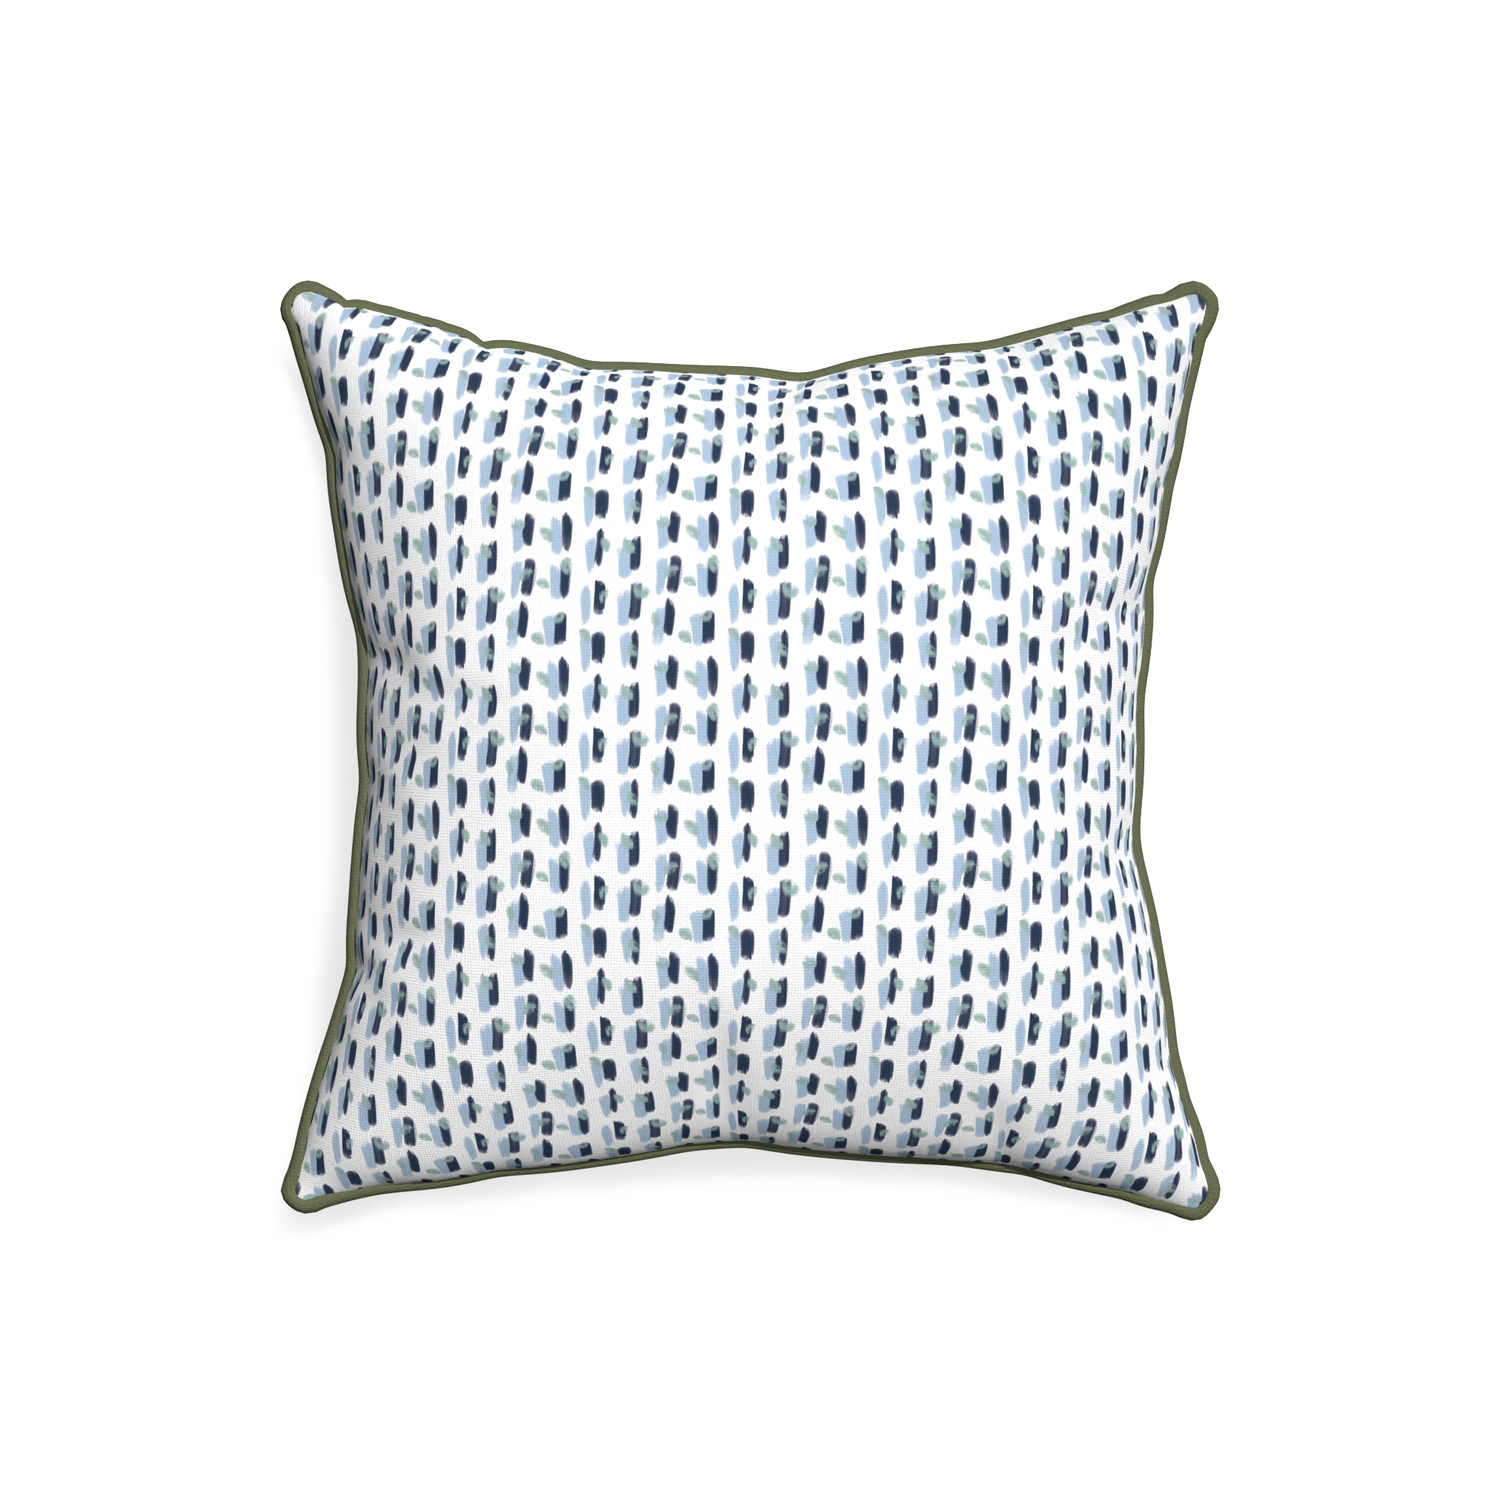 20-square poppy blue custom pillow with f piping on white background